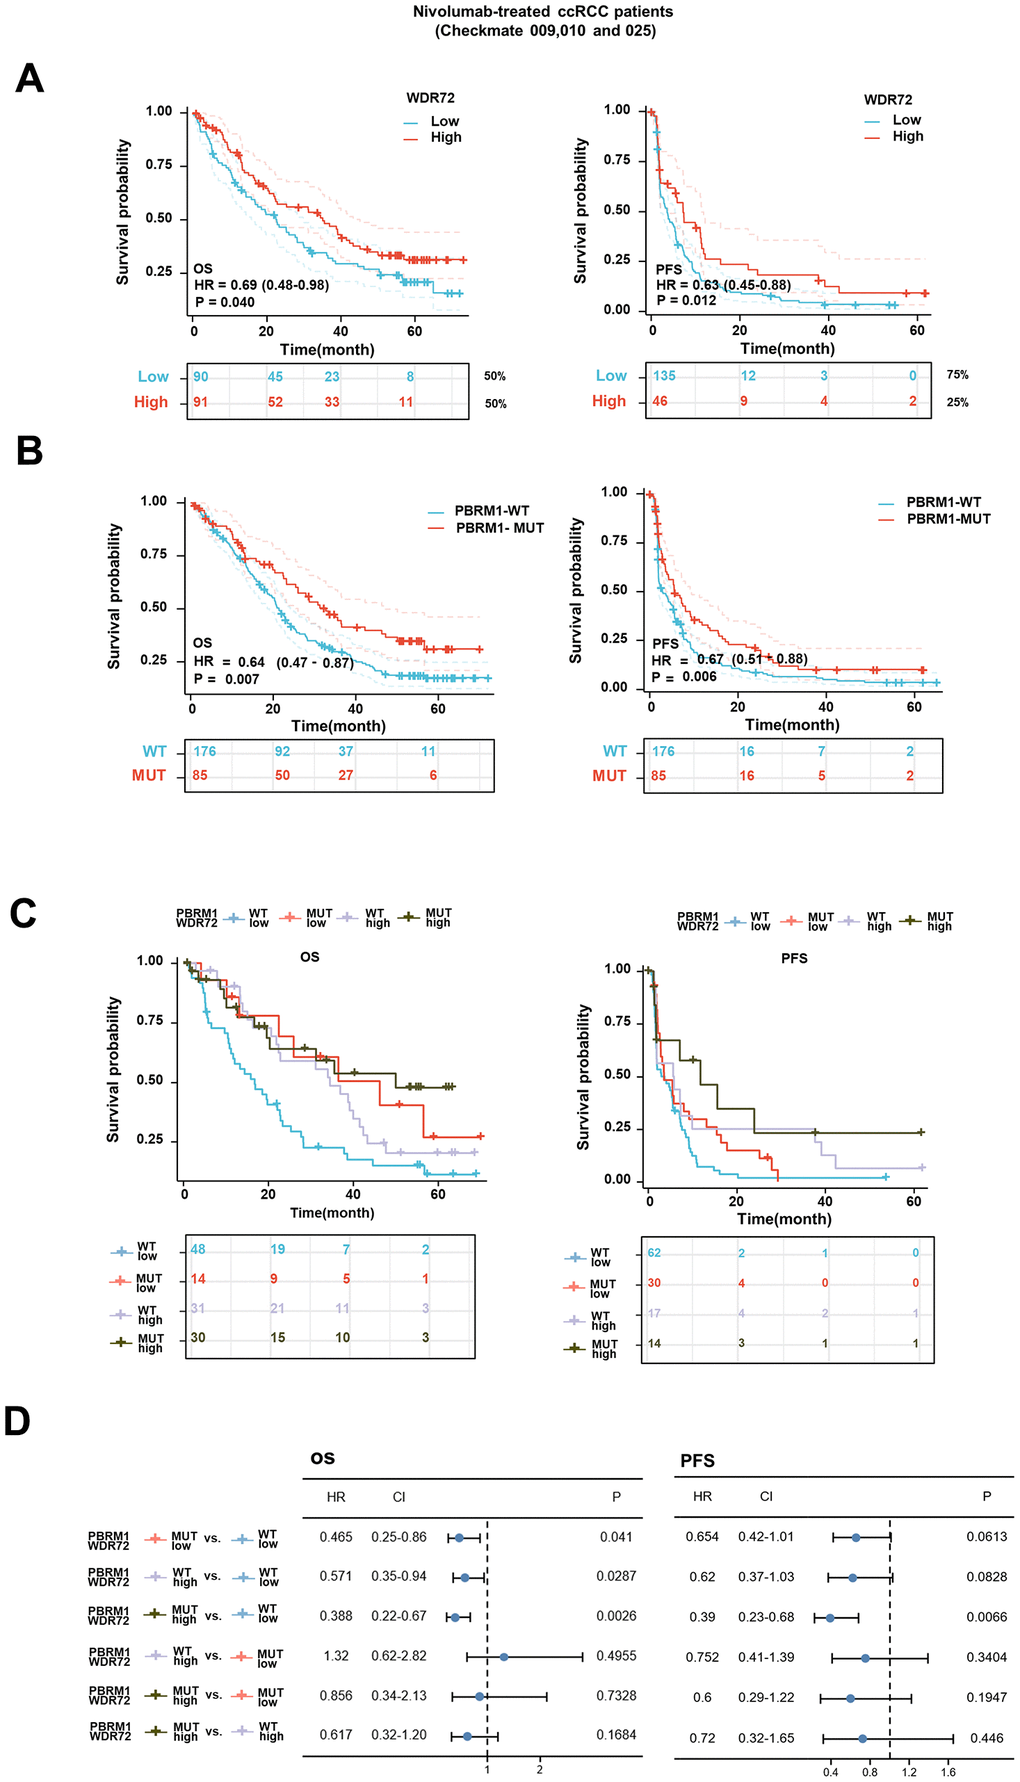 Survival analysis for patients with advanced ccRCC treated with Nivolumab and stratified by WDR72 expression and PBRM1 mutational status. (A) Kaplan-Meier curves showing OS (left panel) and PFS (right panel) in patients treated with Nivolumab divided into WDR72-High group (≥50% for OS, ≥75% for PFS) and WDR72-Low group (B) Kaplan-Meier curves showing OS (left panel) and PFS (right panel) in patients treated with Nivolumab divided PBRM1-WT and PBRM1-MUT in all Checkmate cohorts. (C) Kaplan-Meier curves (OS: left panel, PFS: right panel) stratified by WDR72 expression and PBRM1 mutational status for patients treated with Nivolumab in the entire cohort, according to 50rd (OS) or 75rd (PFS) percentile of WDR72 expression values. (D) Analysis of the prognostic significance of WDR72 expression and PBRM1 mutational status in patients treated with Nivolumab. Abbreviations: WDR72, WD repeat-containing protein 72; PBRM1, Recombinant Polybromo1; ccRCC, clear cell renal cell carcinoma; OS, overall survival; PFS, progression free survival; MUT, mutated; WT, wild type. HR, hazard ratio; CI, confidence interval.